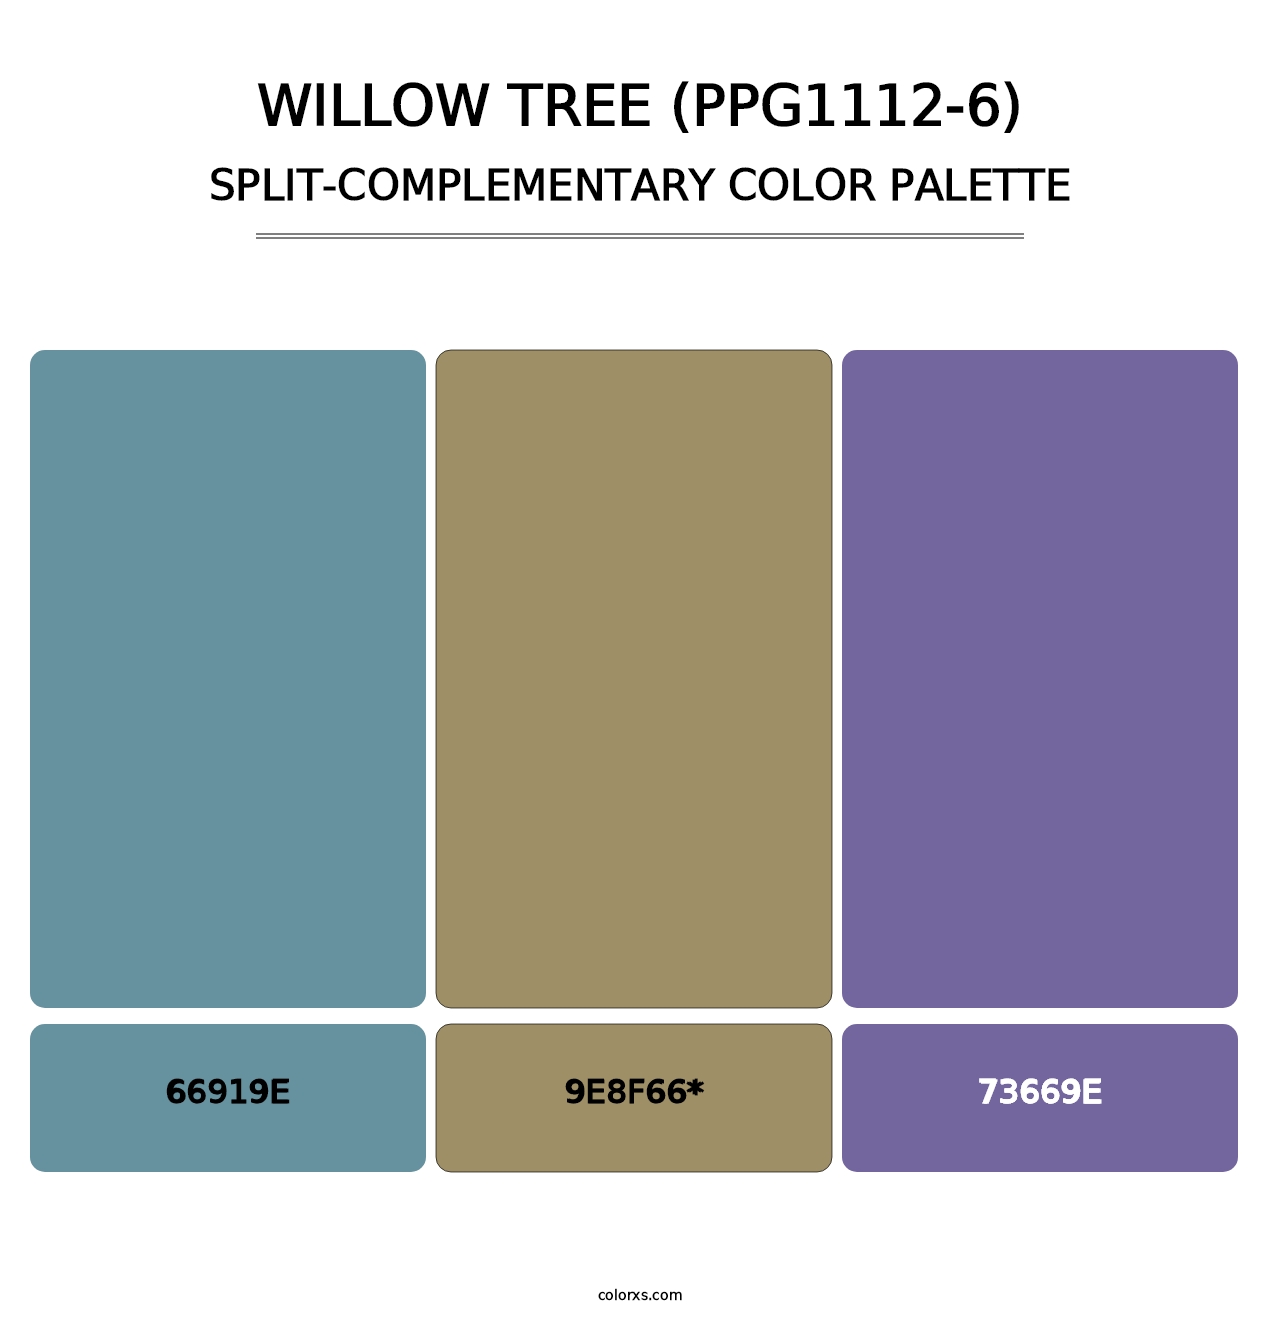 Willow Tree (PPG1112-6) - Split-Complementary Color Palette